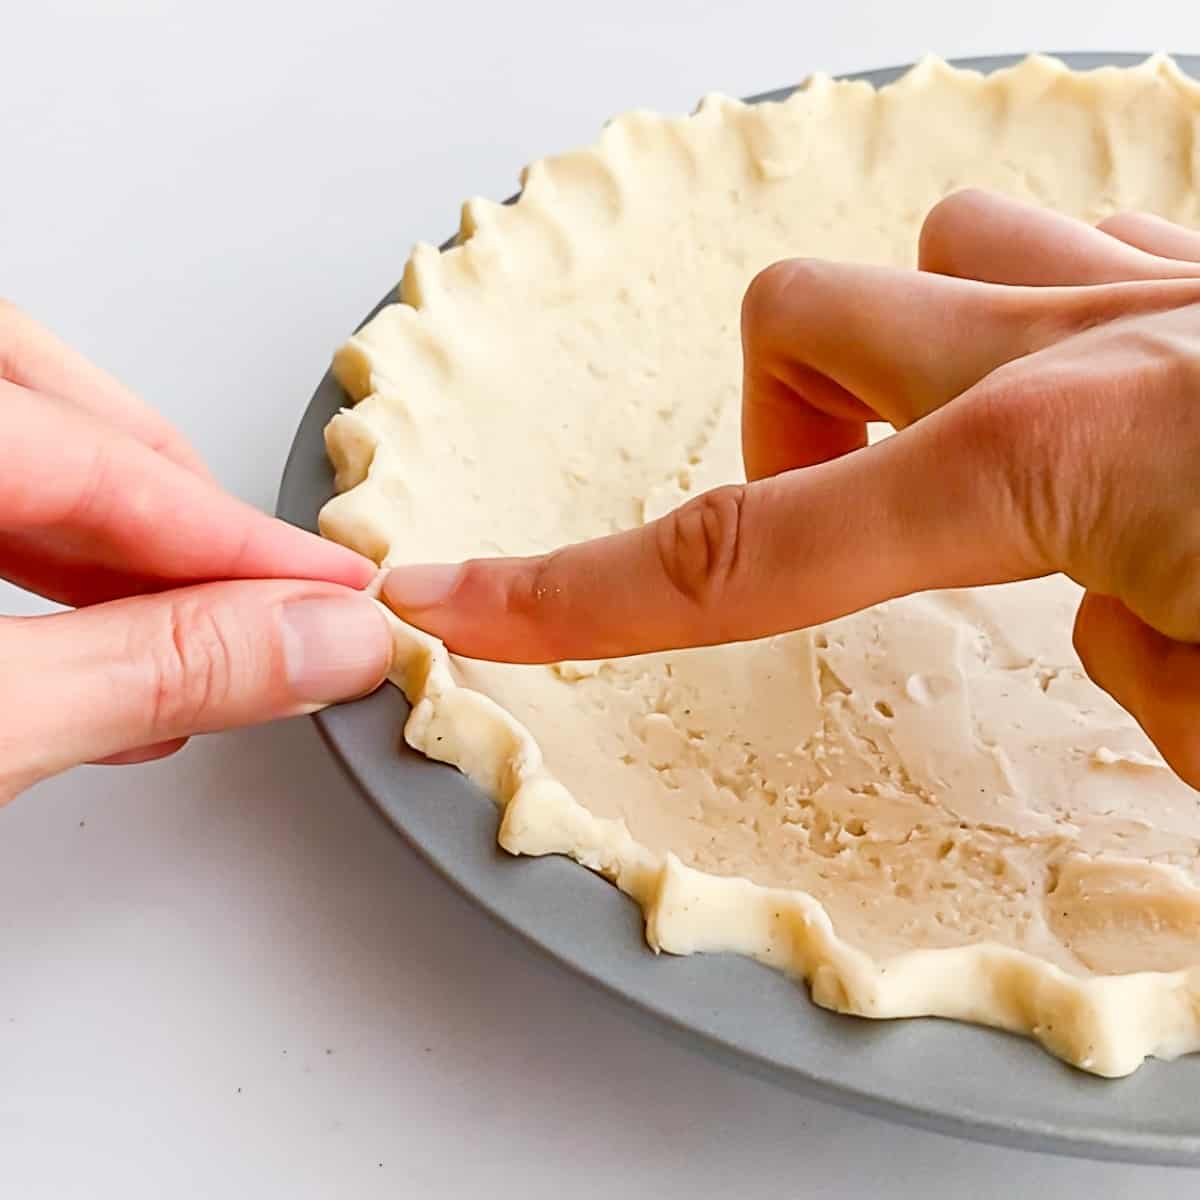 Using two hands to gently crimp a decorative edge along the unbaked pie crust.